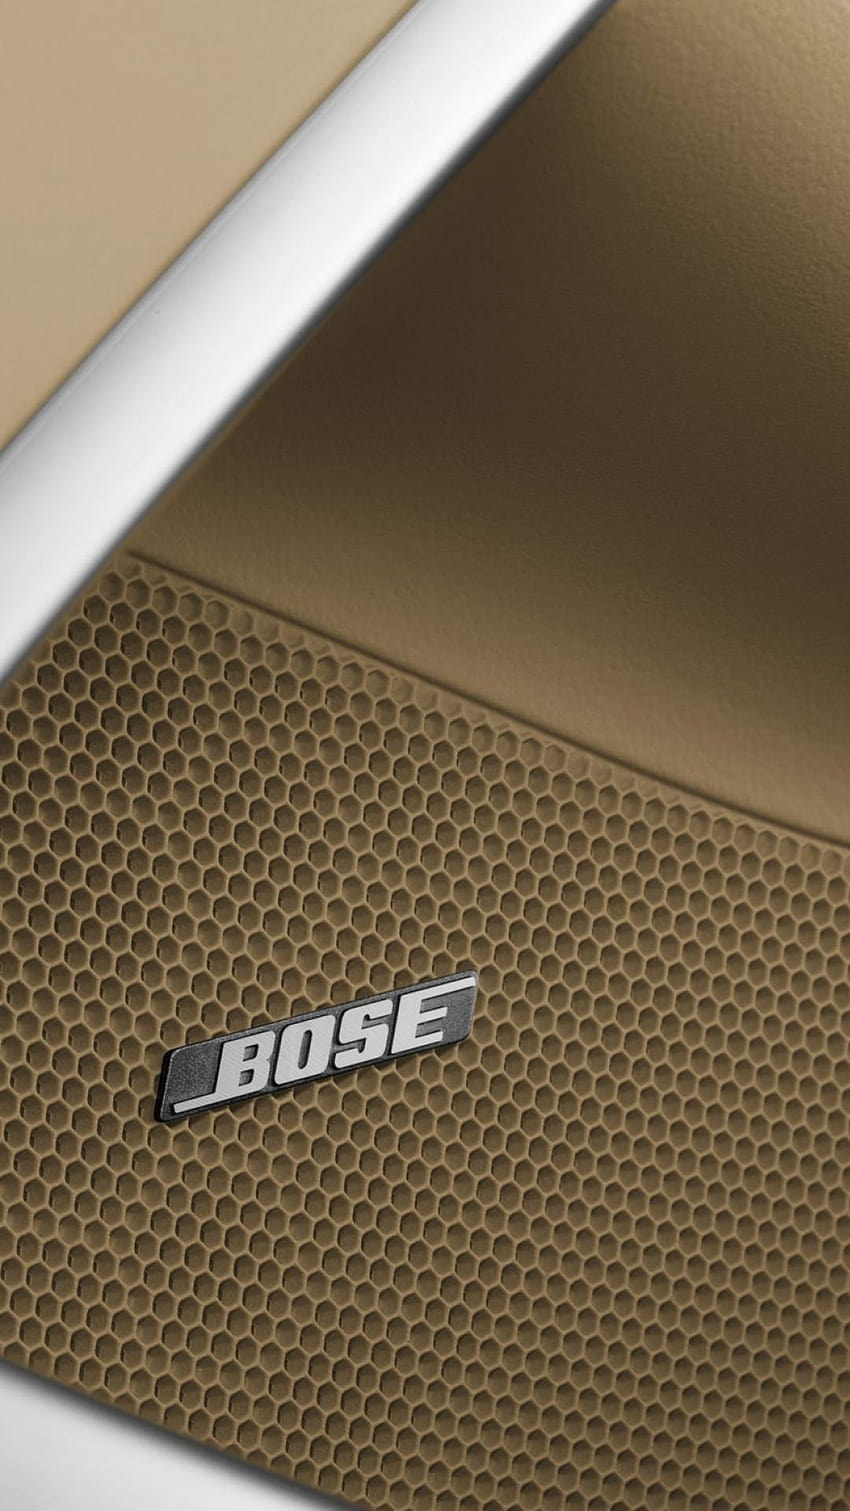 Best 4 Bose Backgrounds on Hip, bose iphone HD phone wallpaper